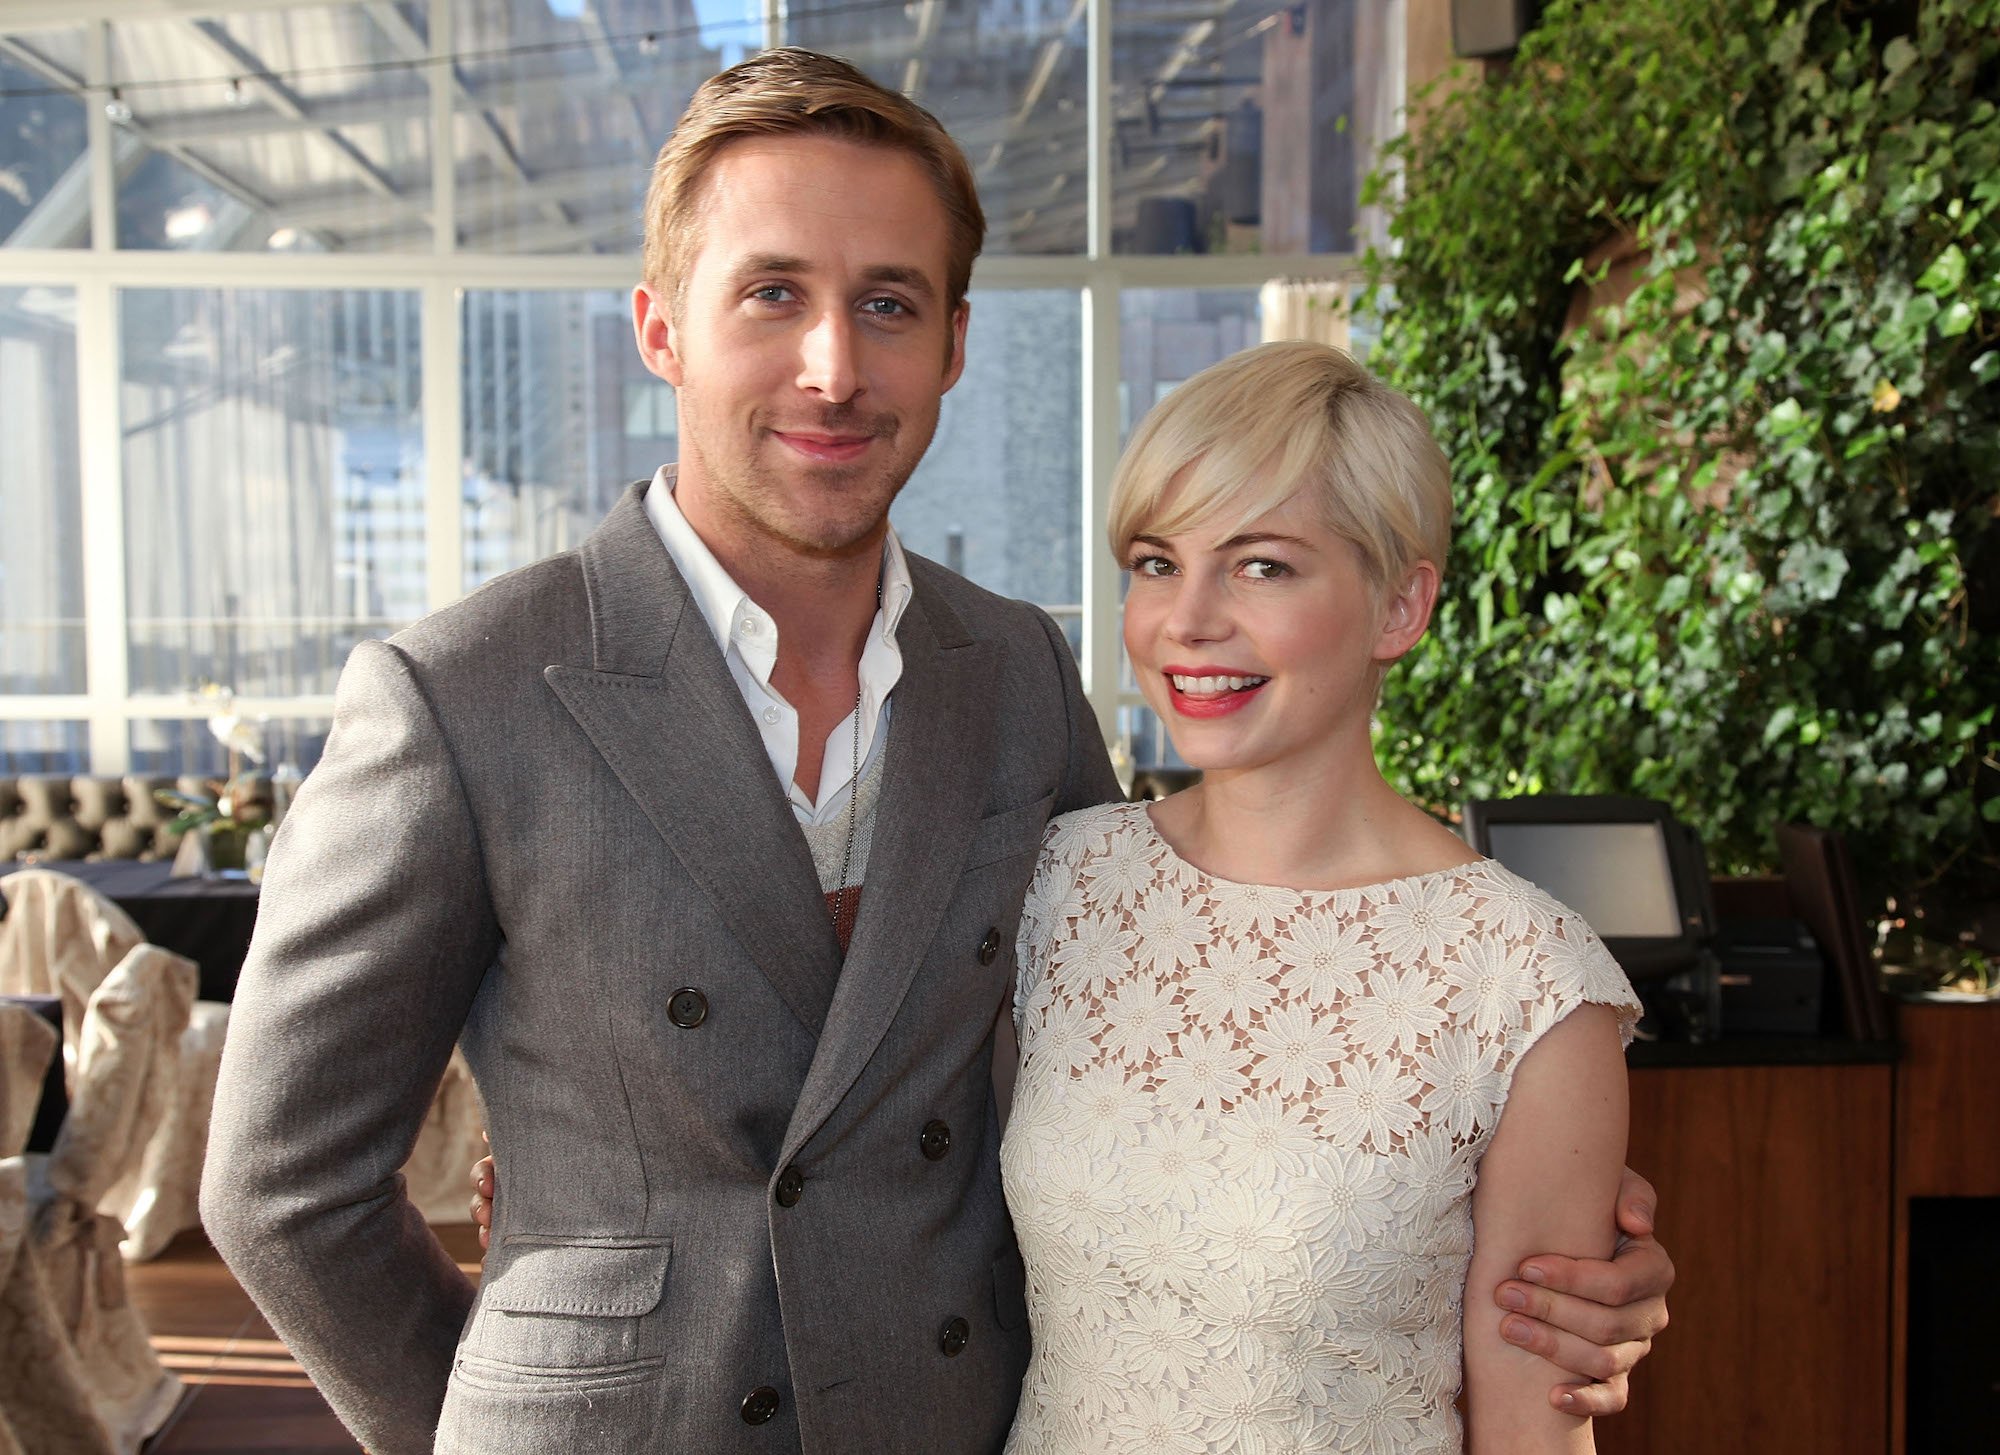 (L-R) Ryan Gosling and Michelle Williams smiling